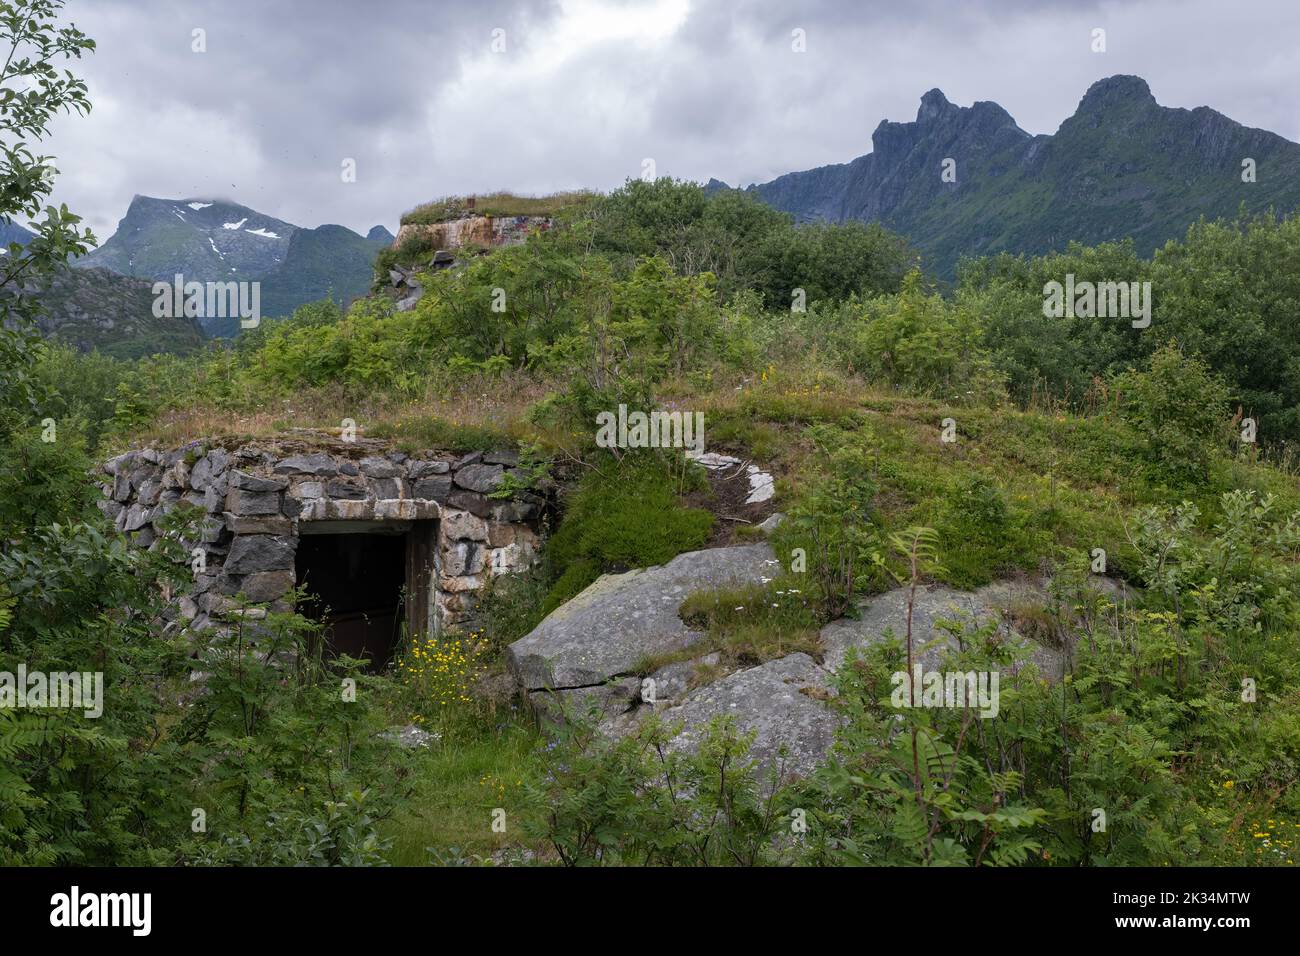 Svolvaer, Norway - July 17, 2022: Kjeoya Fort was a German coastal fort was built by the Germans during Second World War with batteries and bunker fac Stock Photo